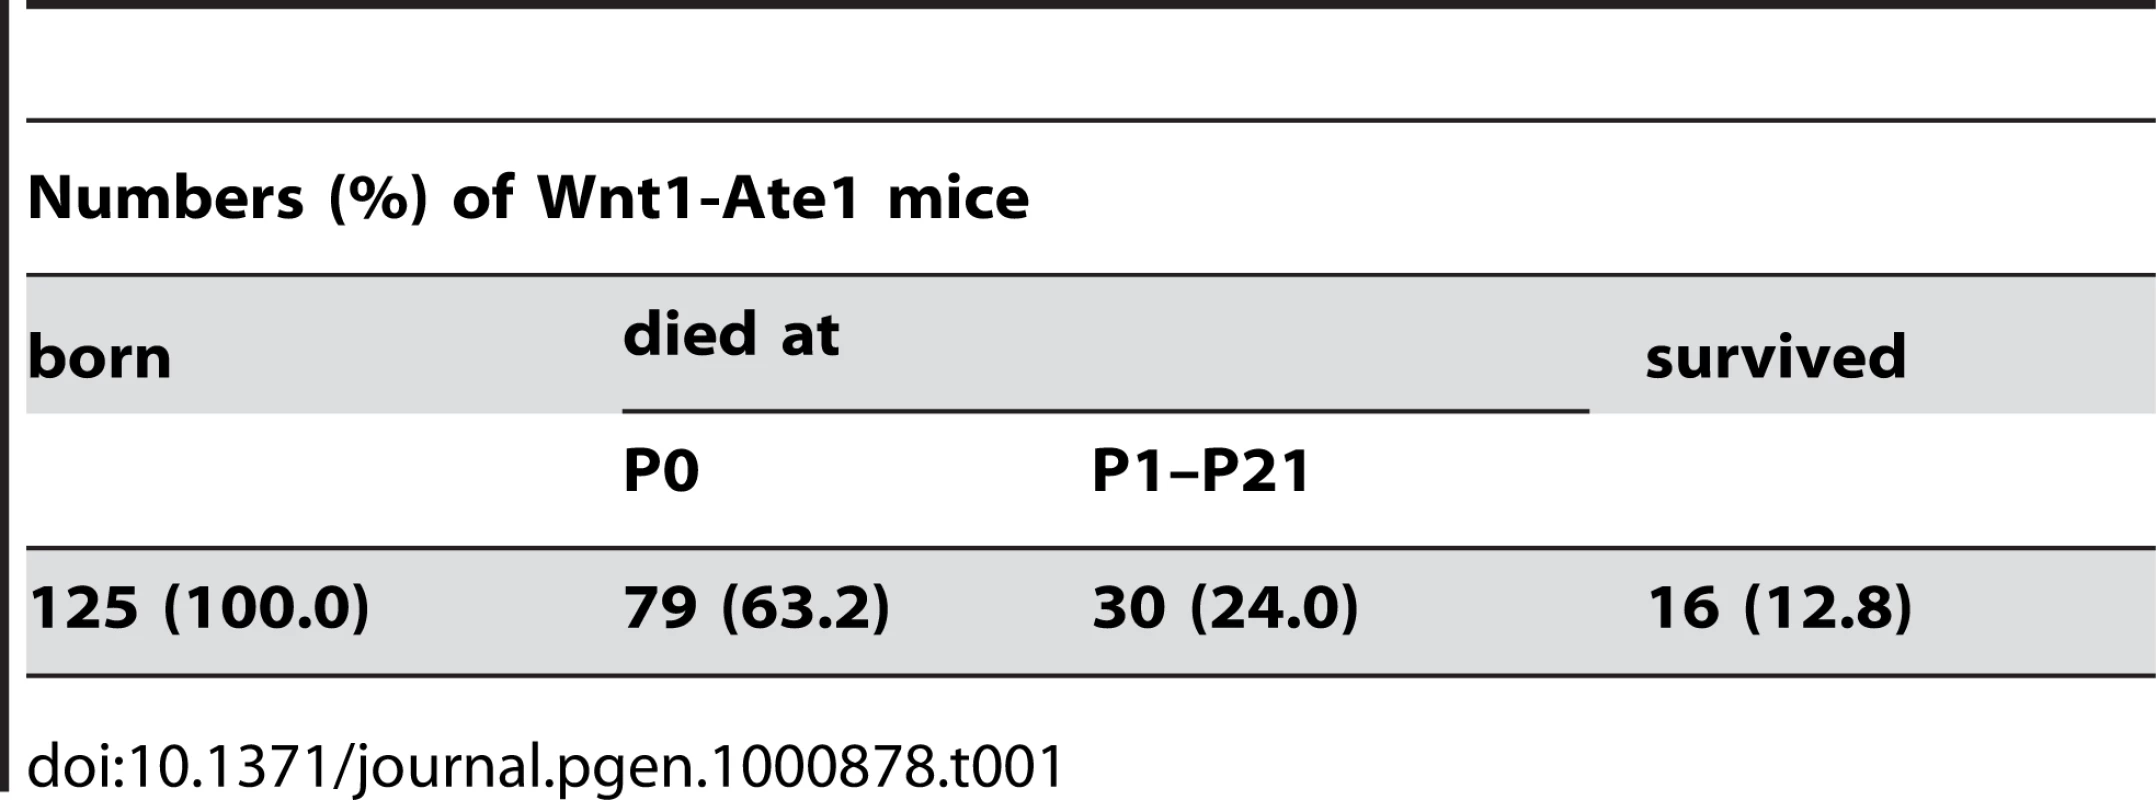 Death/survival rates of Wnt1-Ate1 mice.